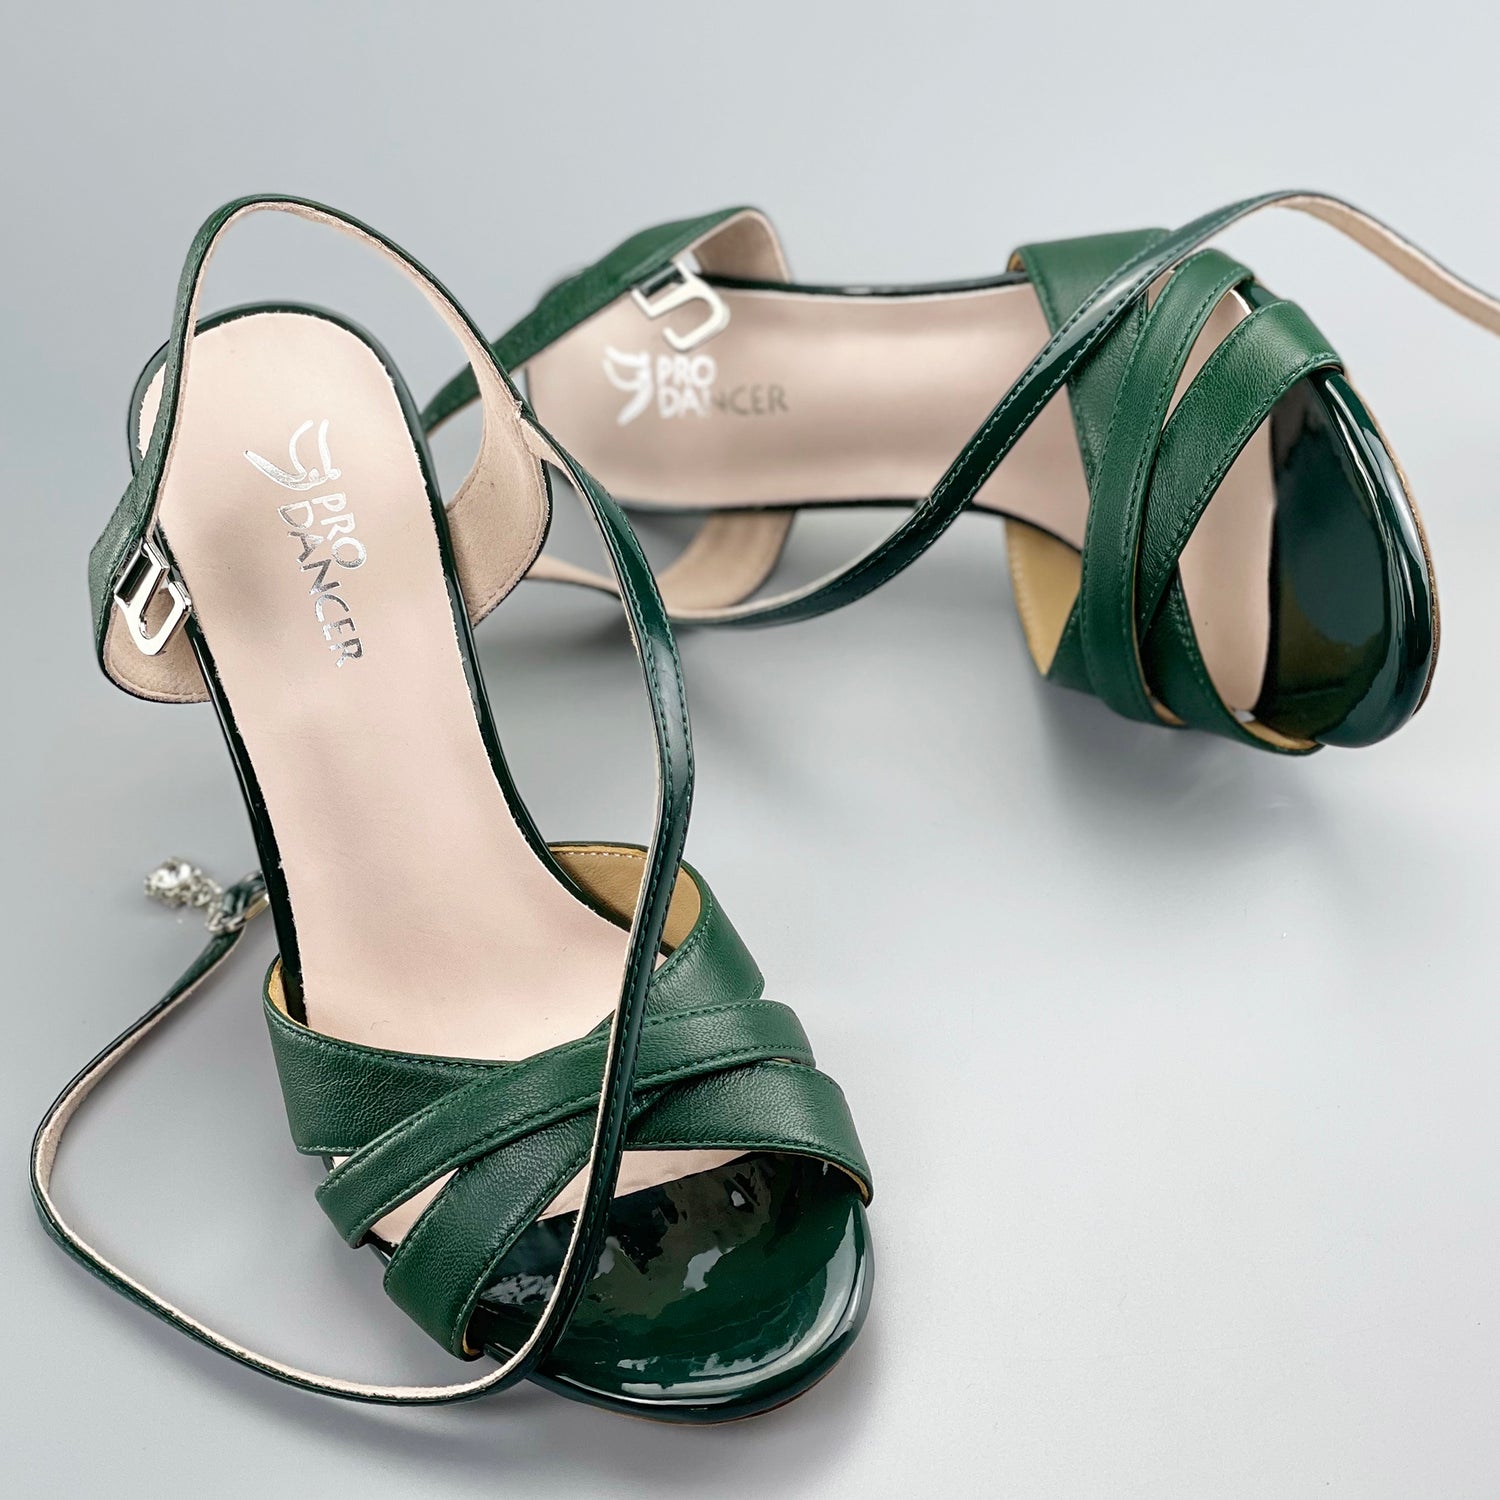 Pro Dancer Green Peep-toe Argentine Tango Shoes with Closed-back High Heels and Hard Leather Sole0